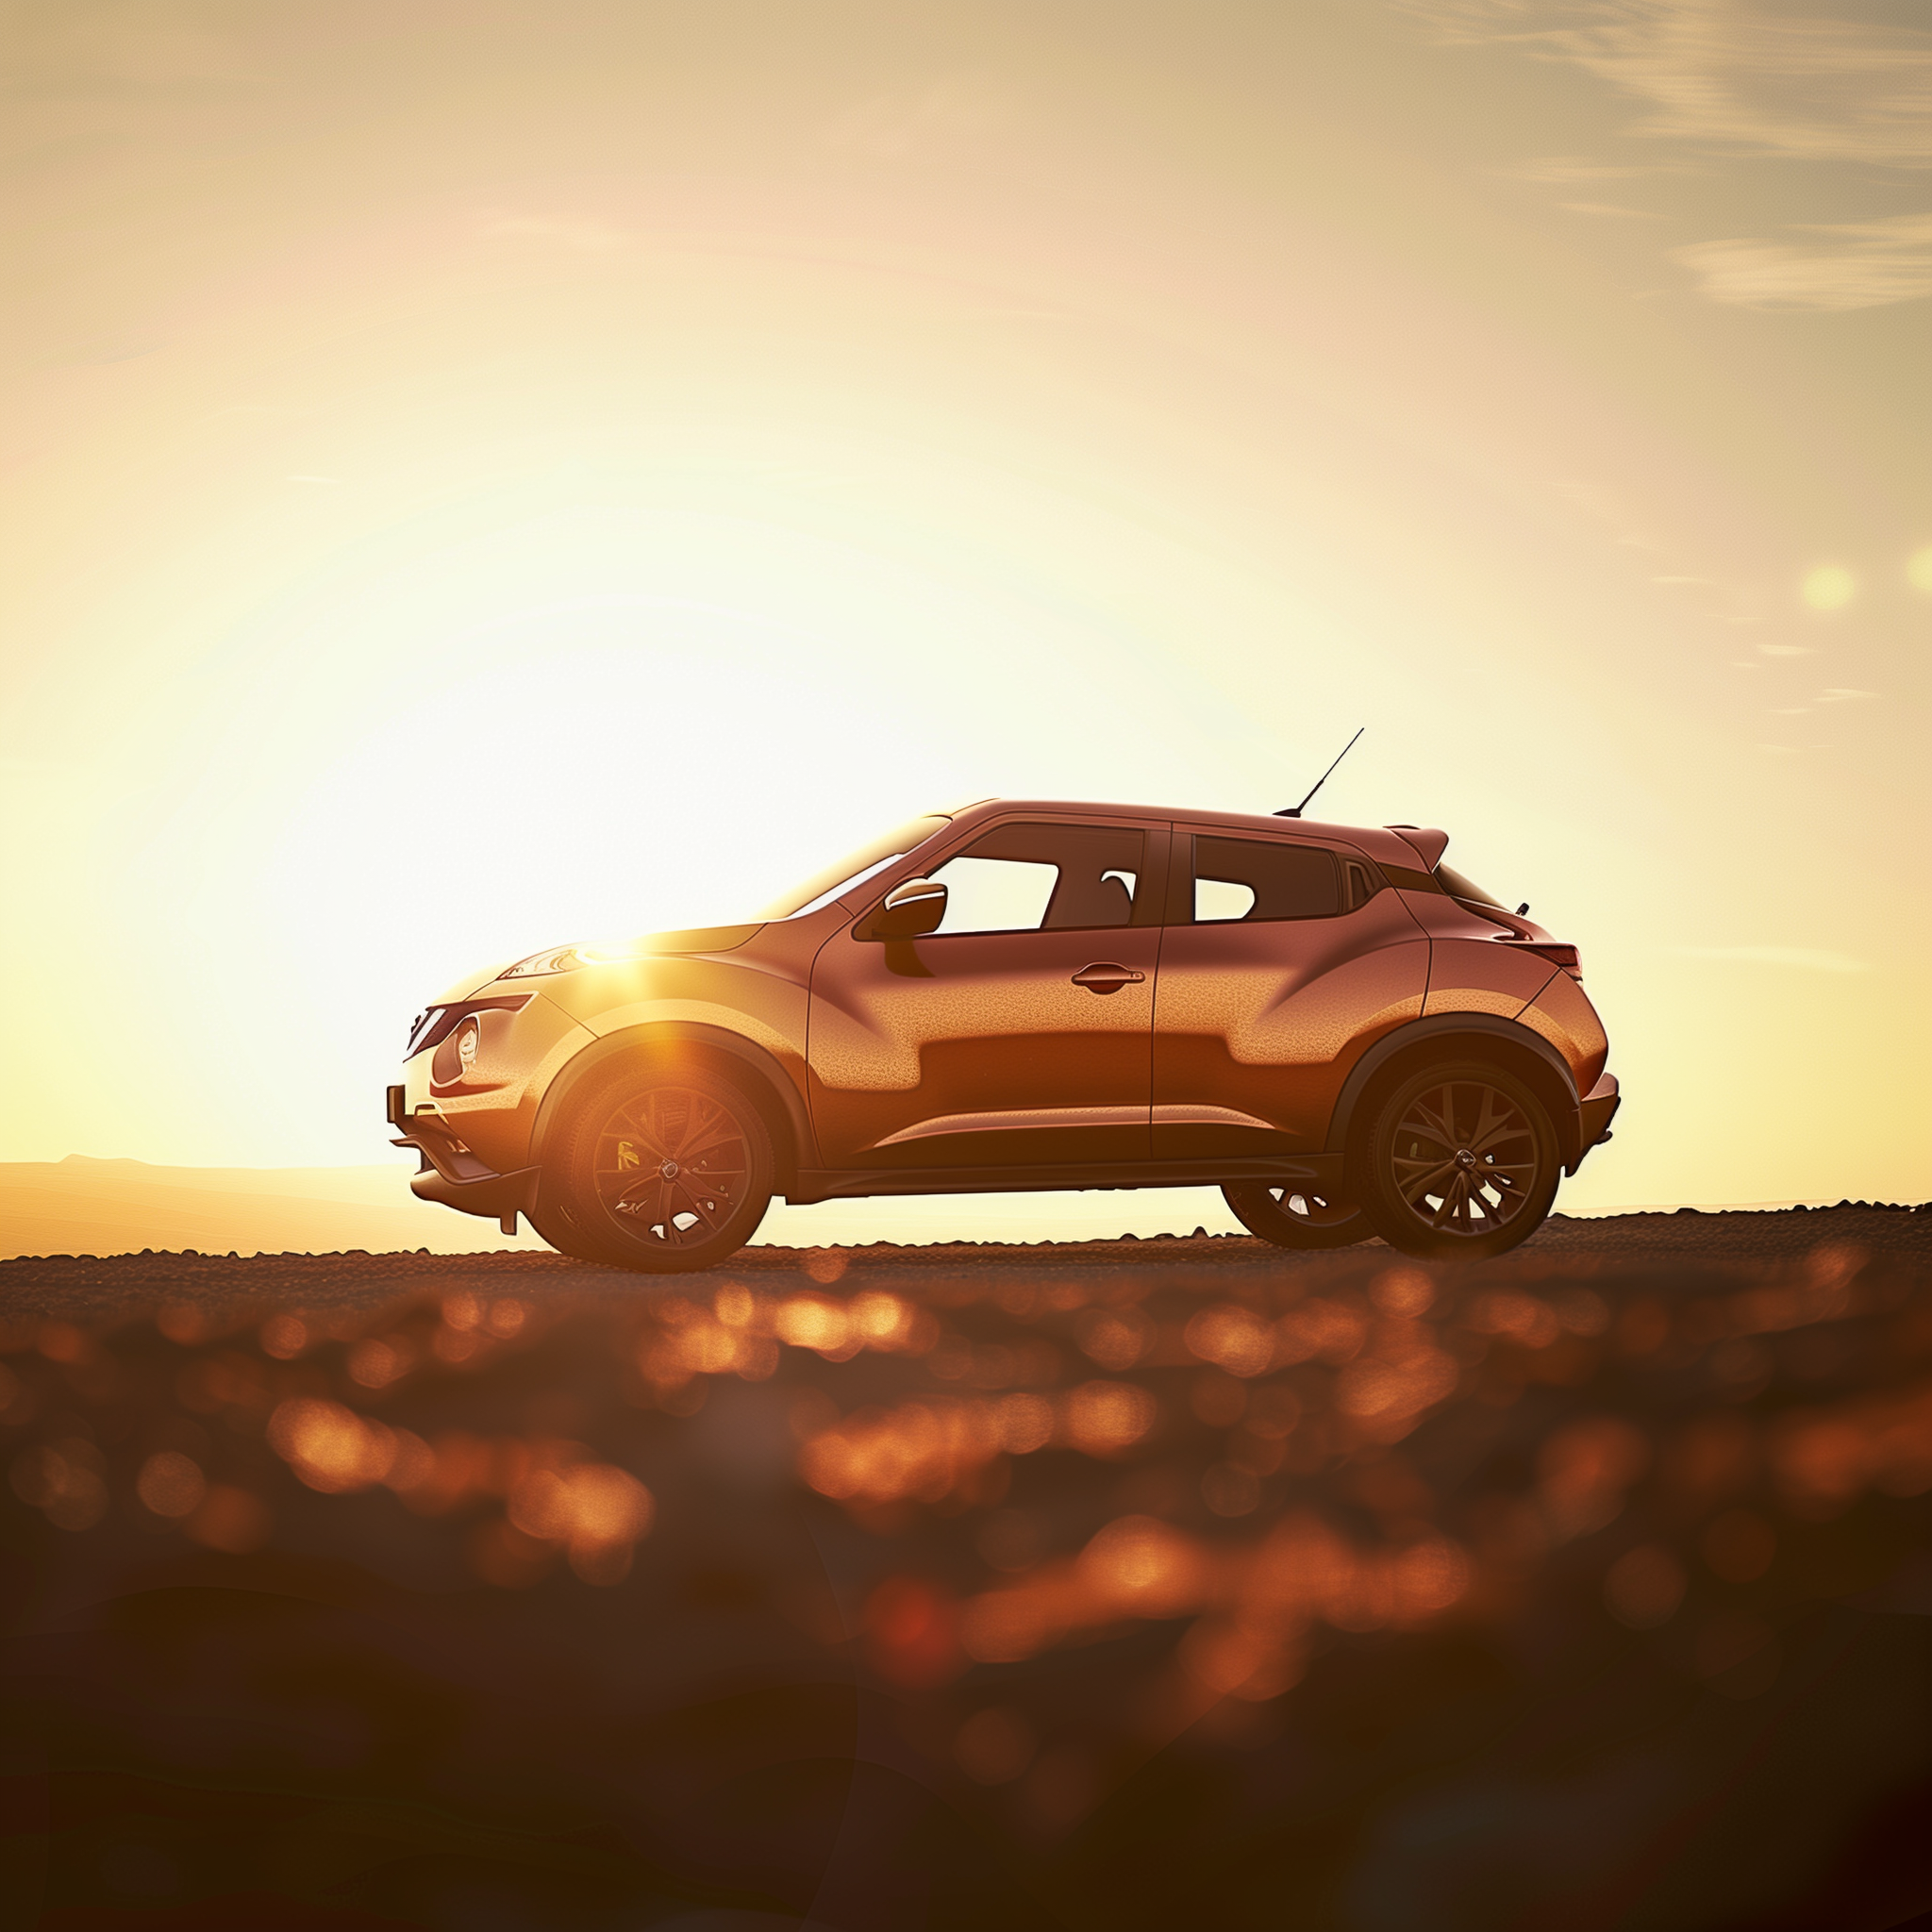 _A_Nissan_Juke_car_is_parked_under_the_blazing_sun